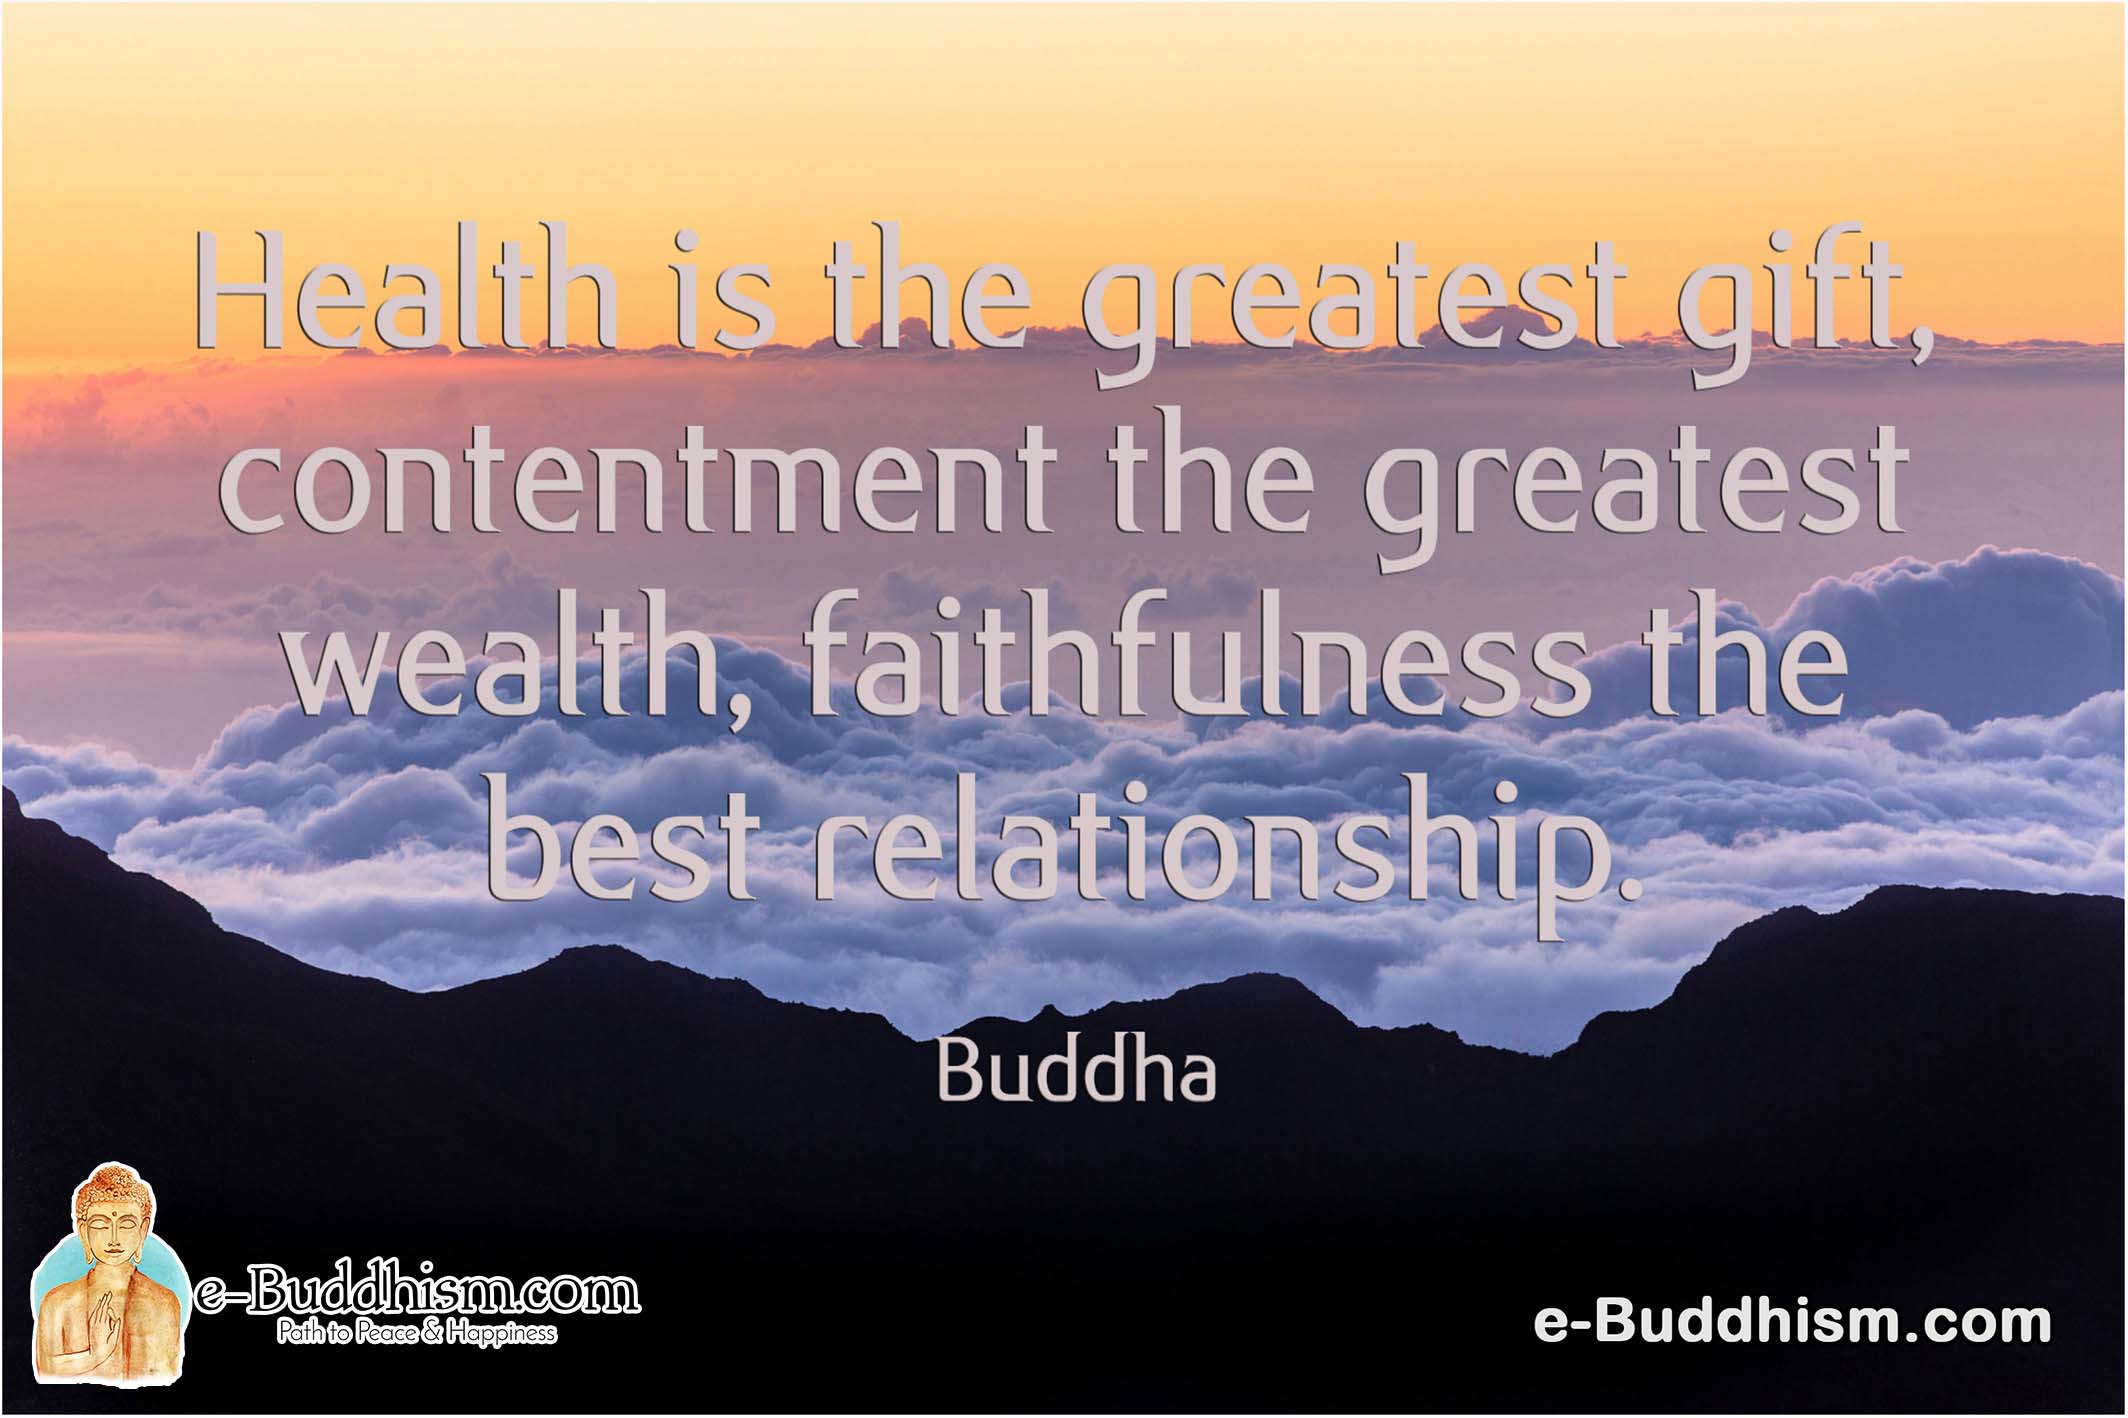 Health is the greatest gift, contentment is the greatest wealth, and faithfulness is the best relationship. -Buddha